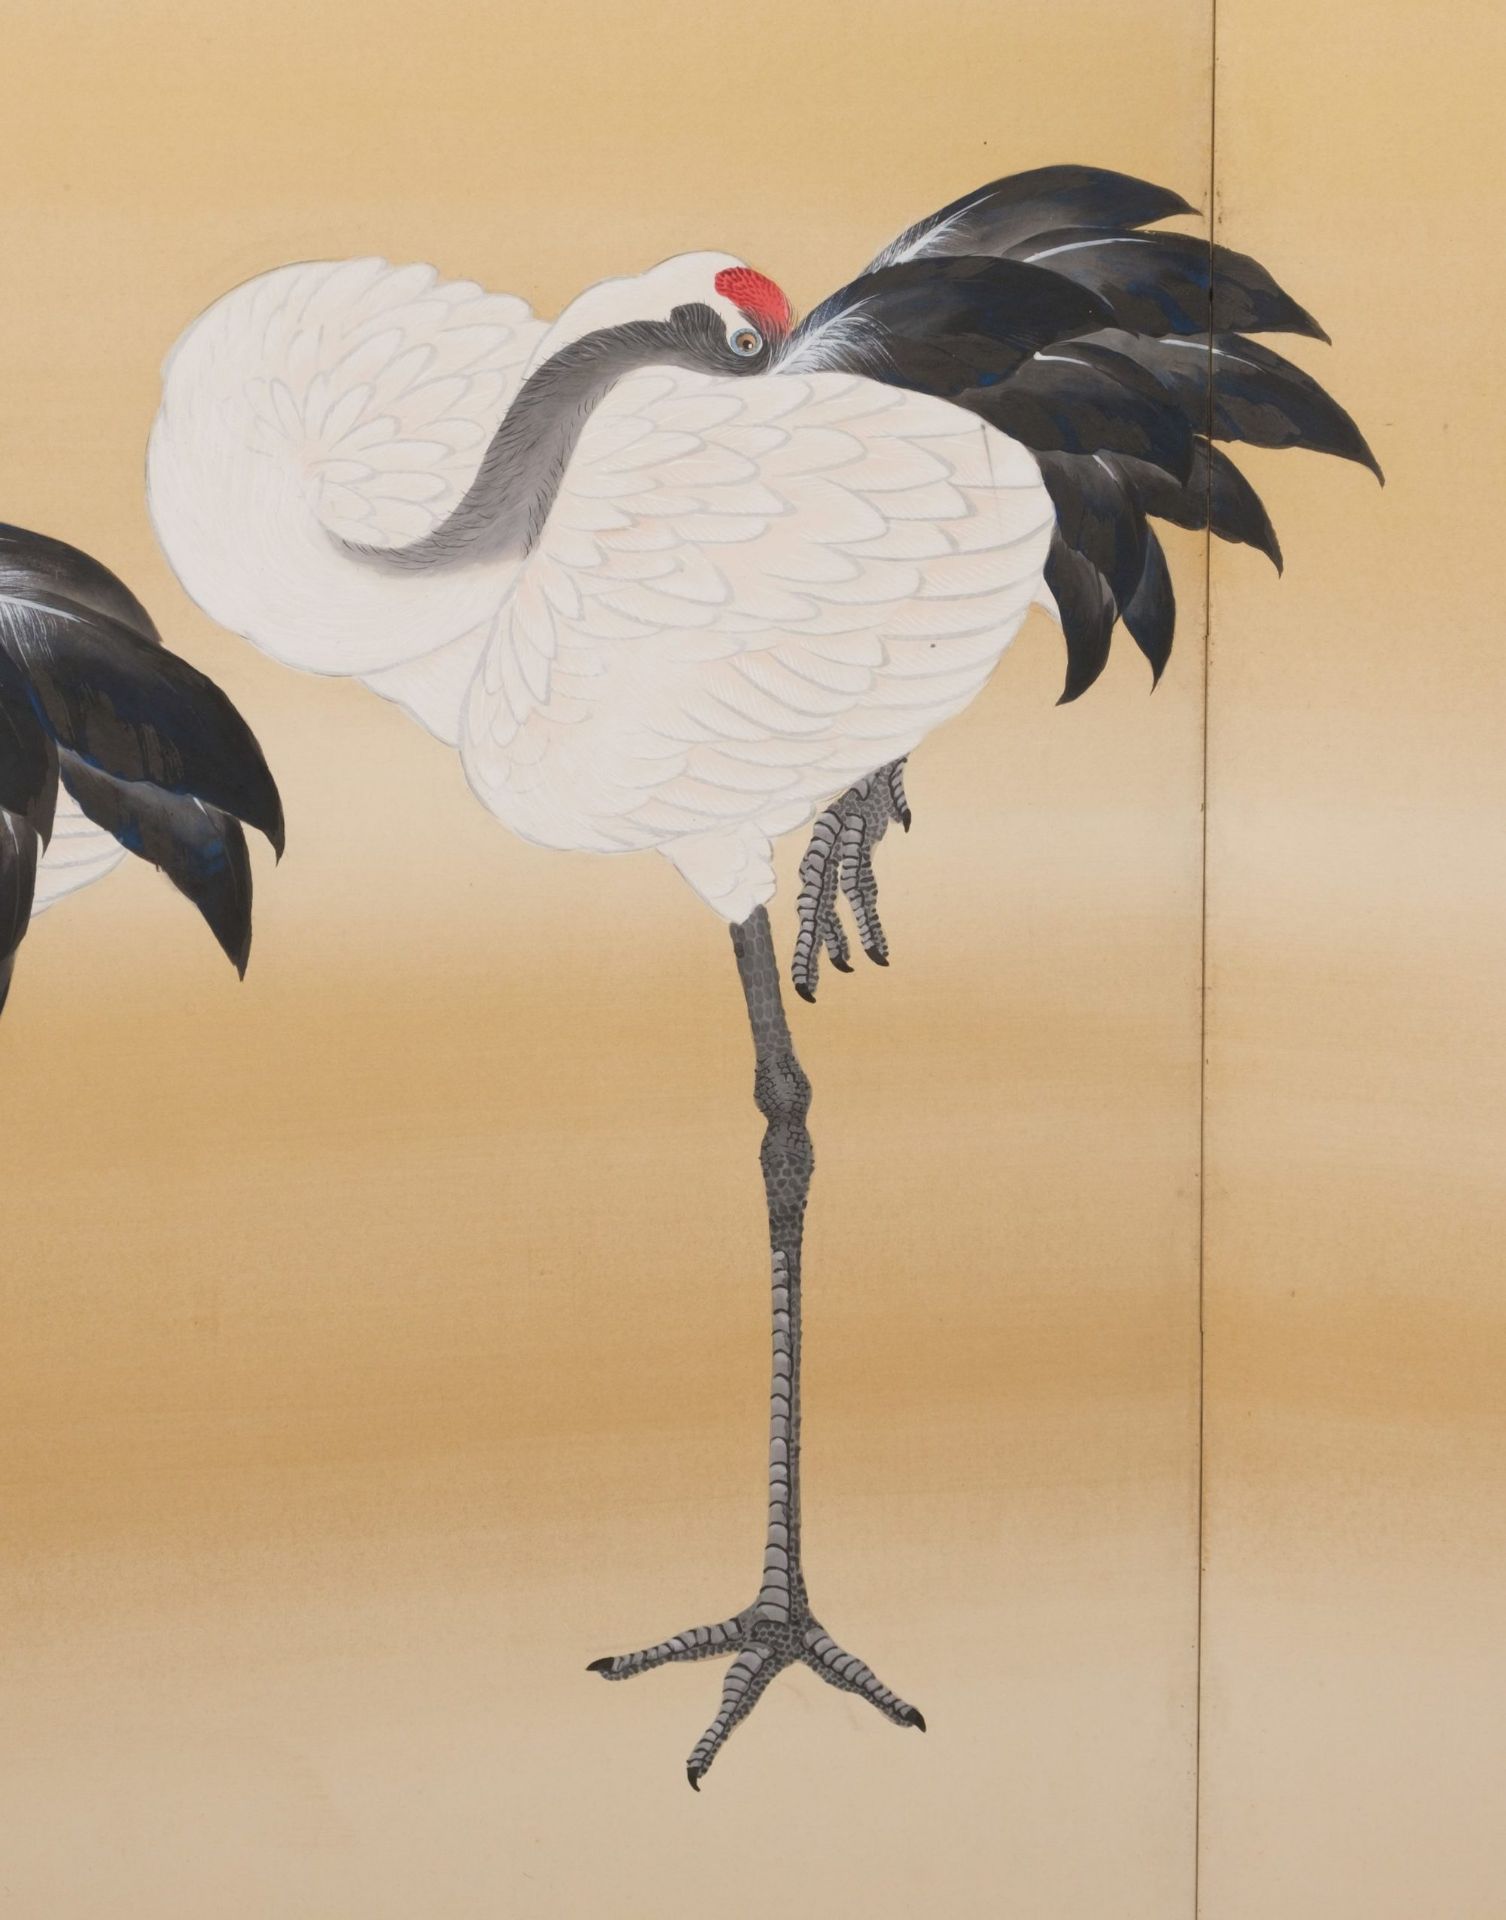 A JAPANESE MID-SIZE 6-PANEL RINPA STYLE BYÔBU (FOLDING SCREEN) WITH CRANES, FIRST HALF 20TH CENTURY - Image 4 of 13